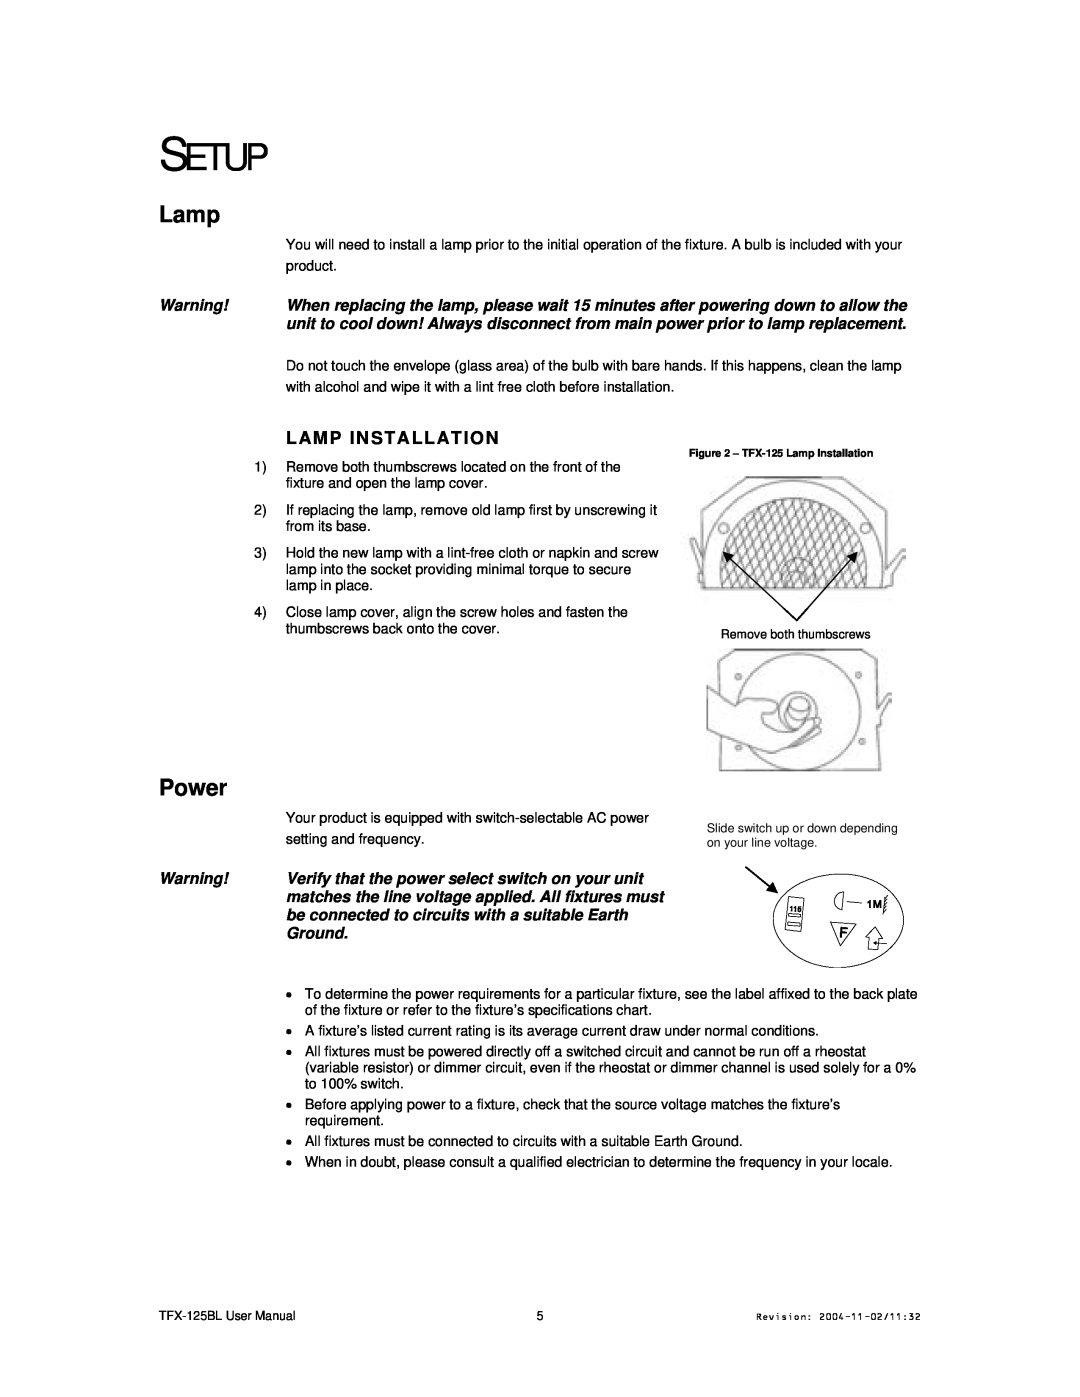 Chauvet TFX- 125BL user manual Setup, Power, Lamp Installation, product, setting and frequency 